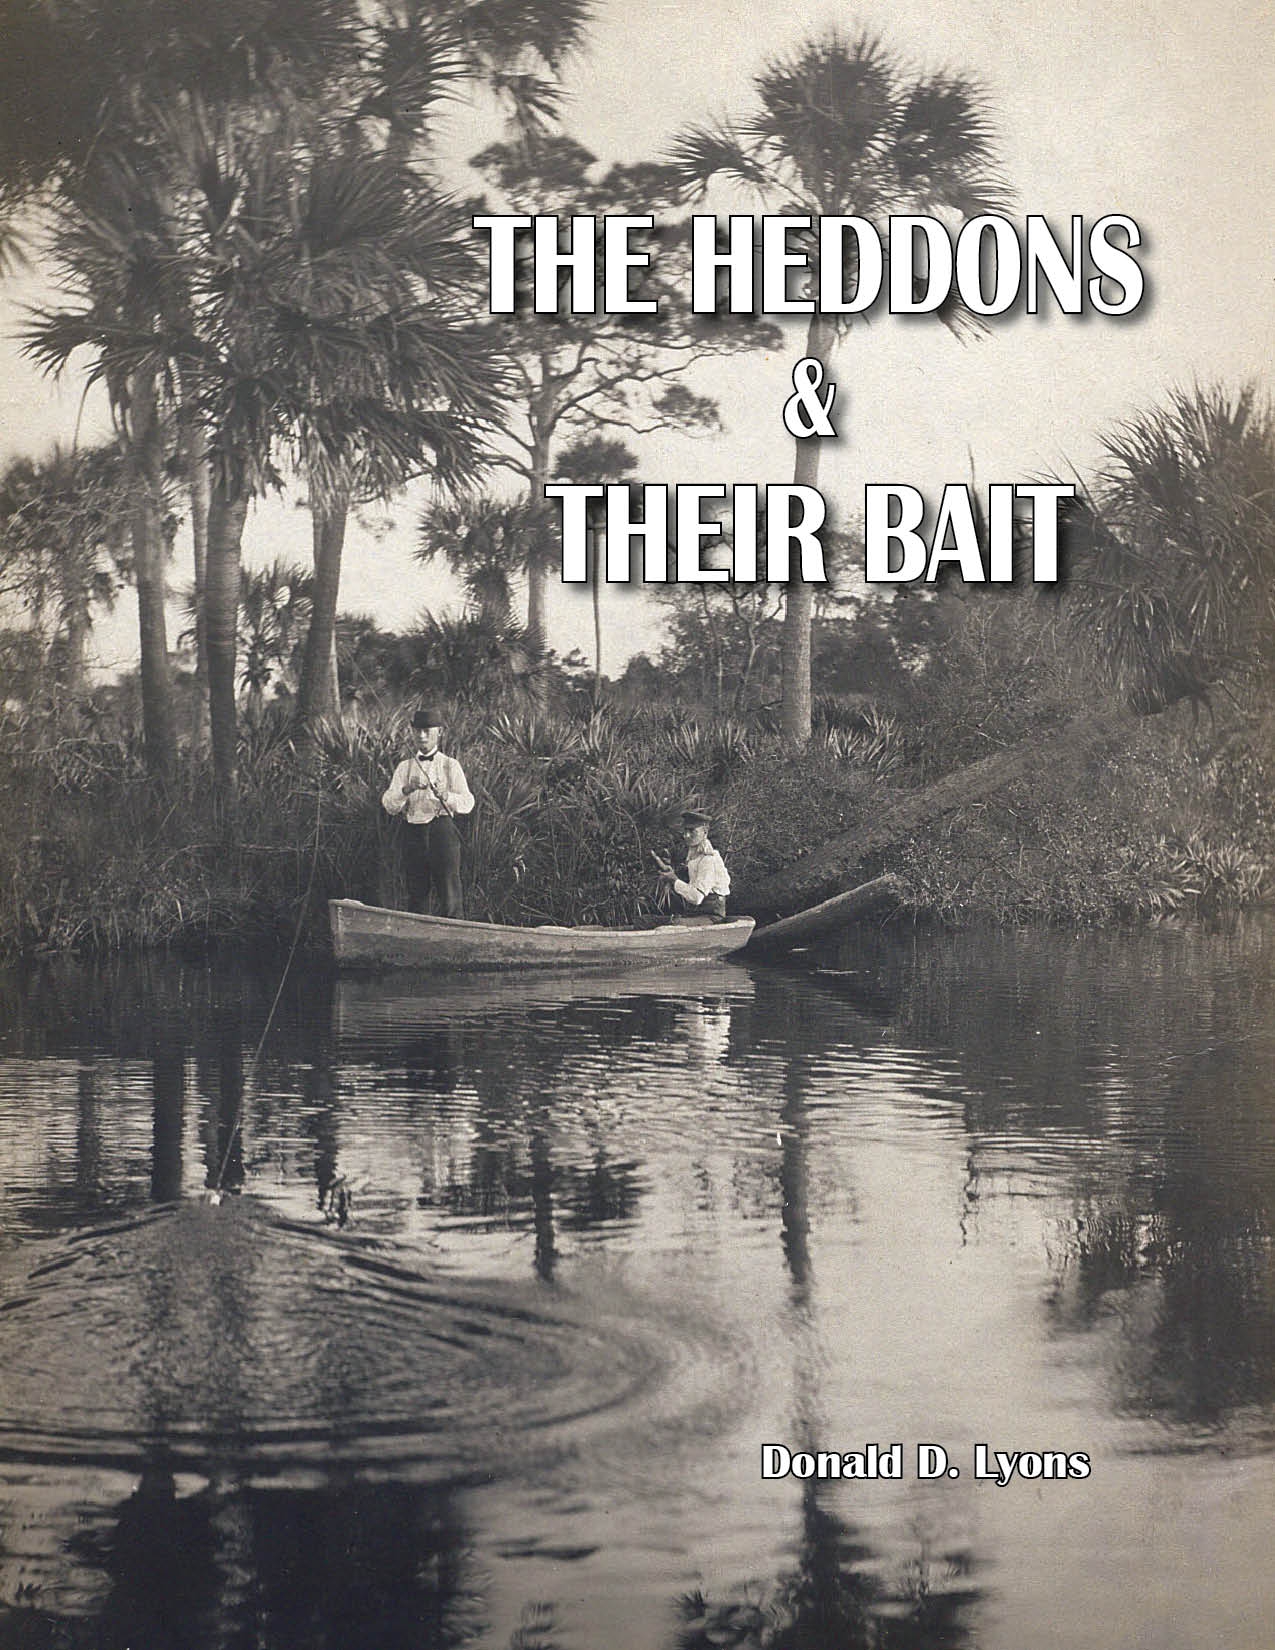 THE HEDDONS and THEIR BAIT: The Story of the Heddon family and the company  they founded. – M. T. Publishing Company Inc.